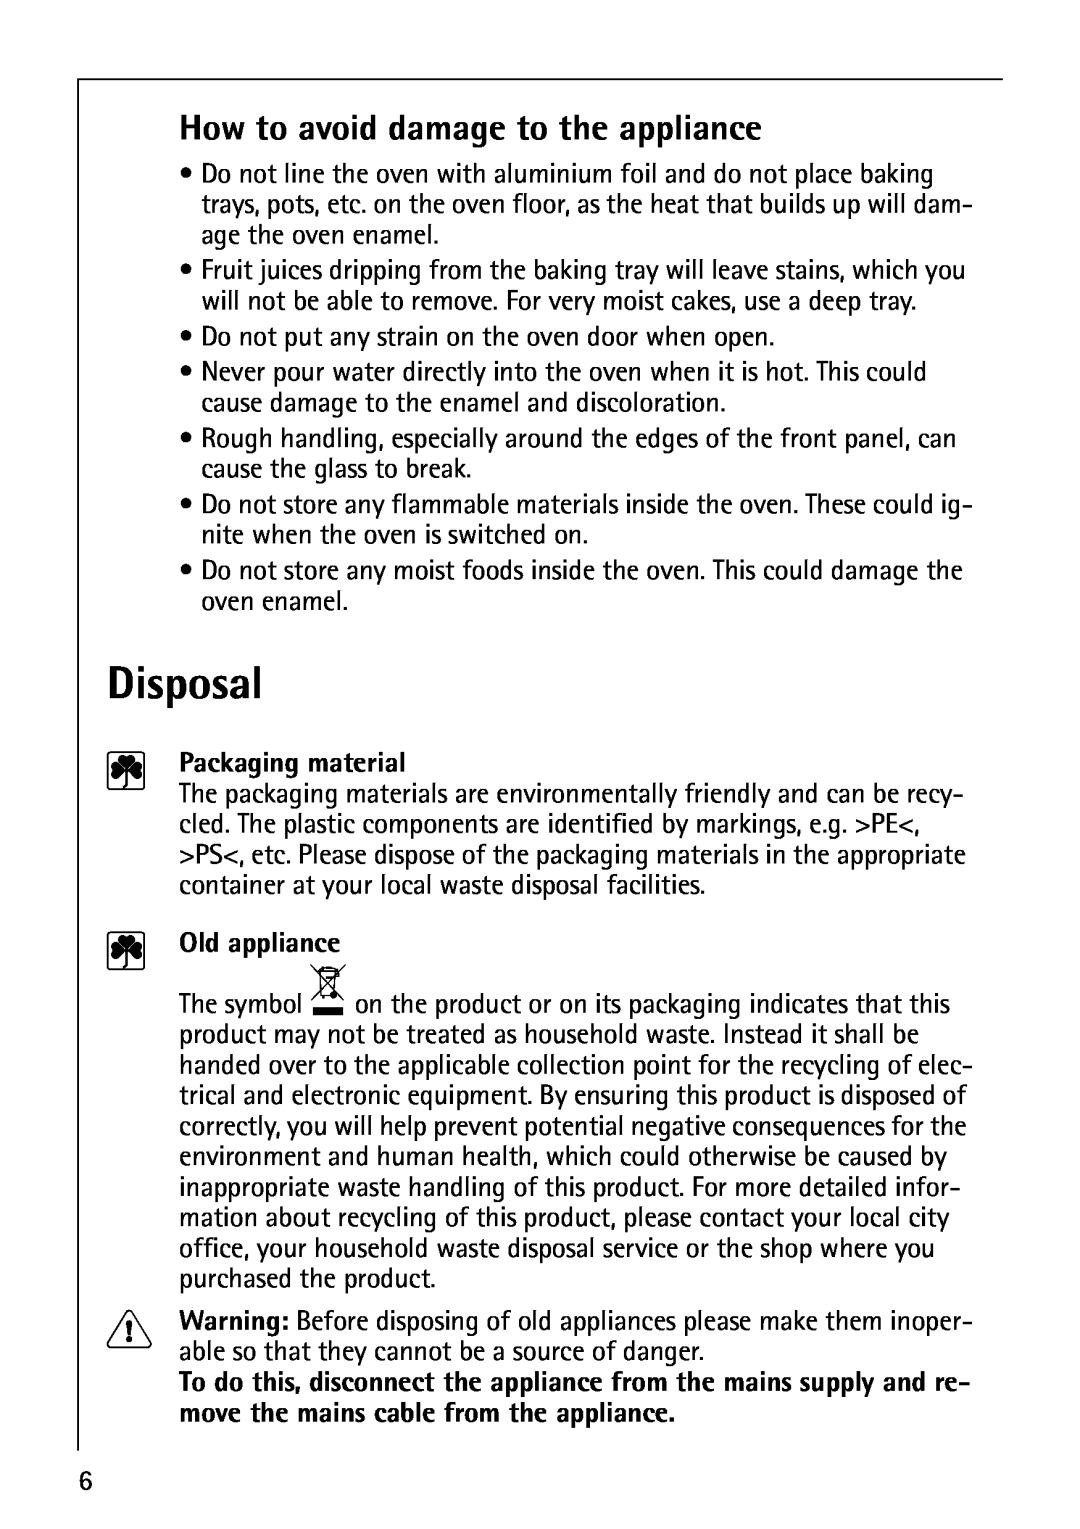 Electrolux B5741-4 manual Disposal, How to avoid damage to the appliance, Packaging material, Old appliance 